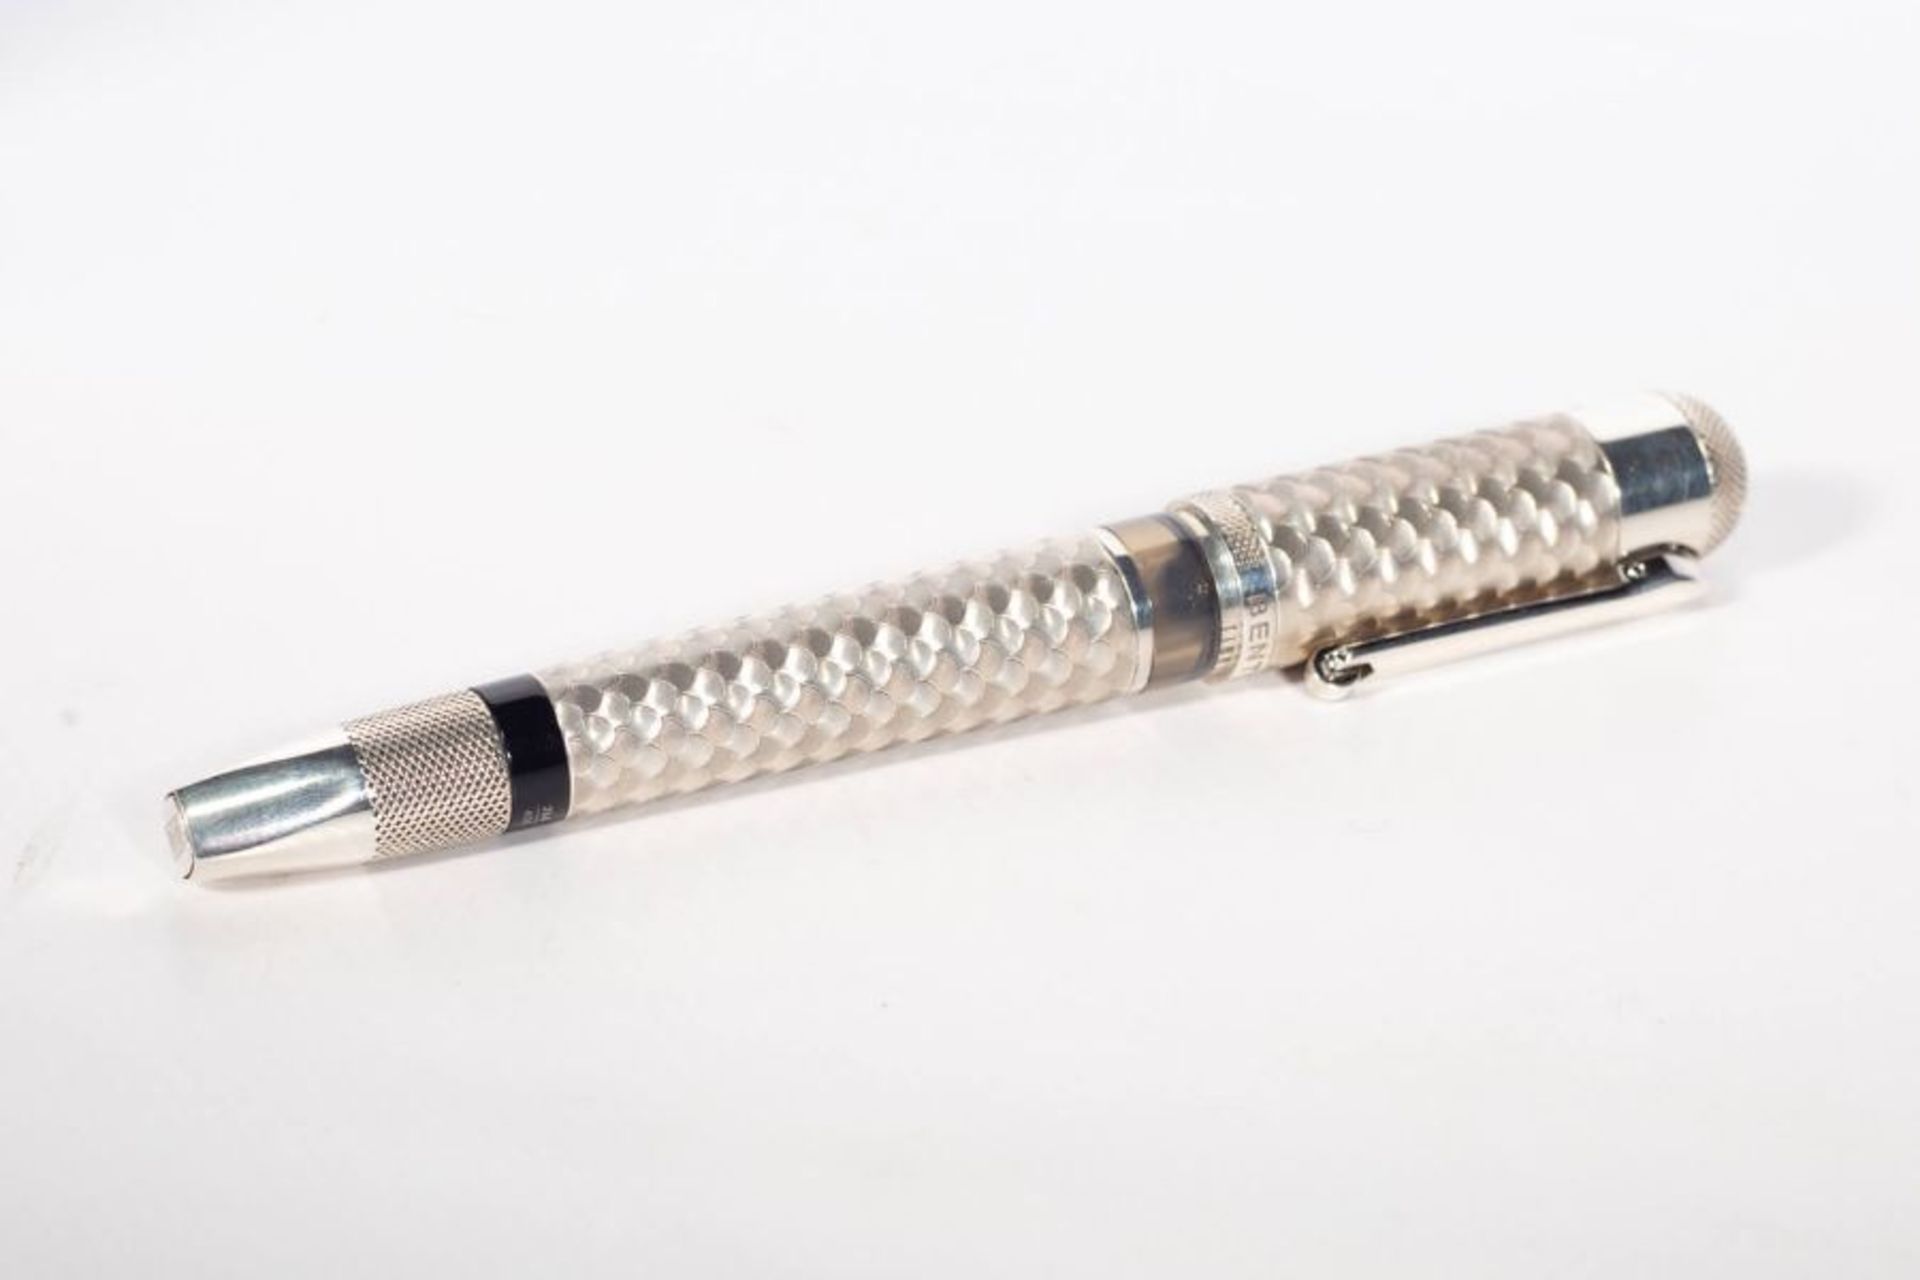 A Tibaldi for Bentley special edition Sterling silver fountain pen to commemorate 60 years of - Image 9 of 14